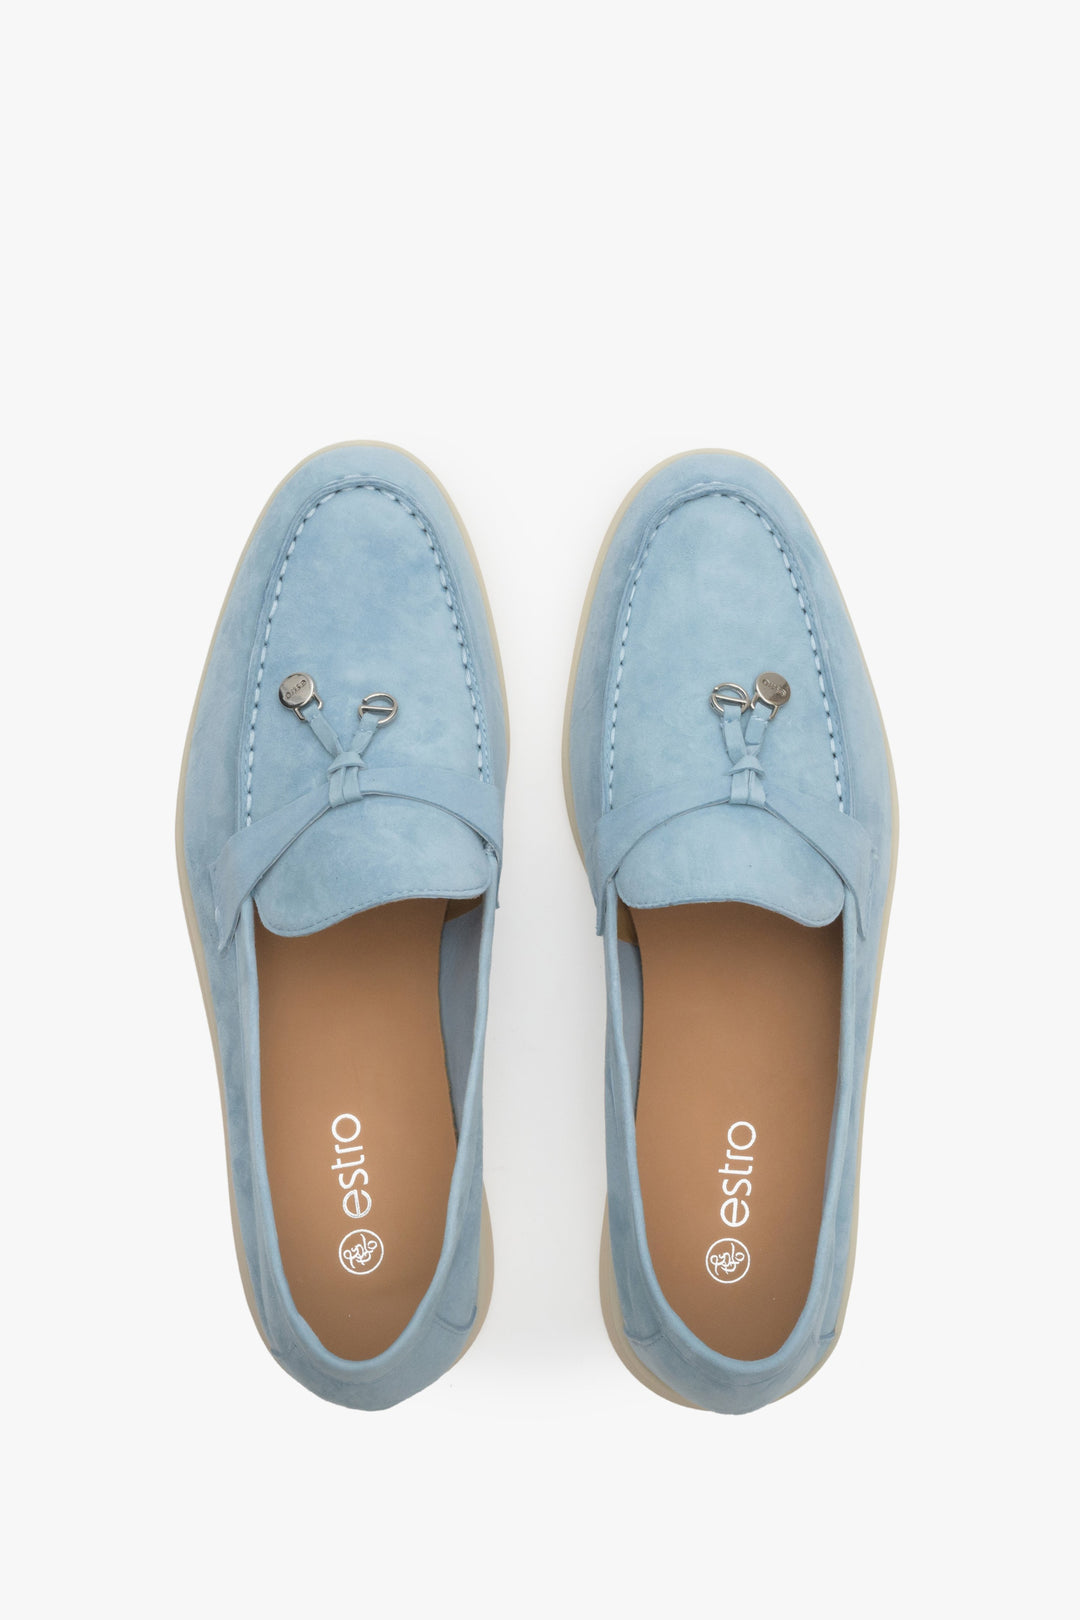 Light blue women's loafers of Estro brand made of velour and leather - presentation of the footwear from above.